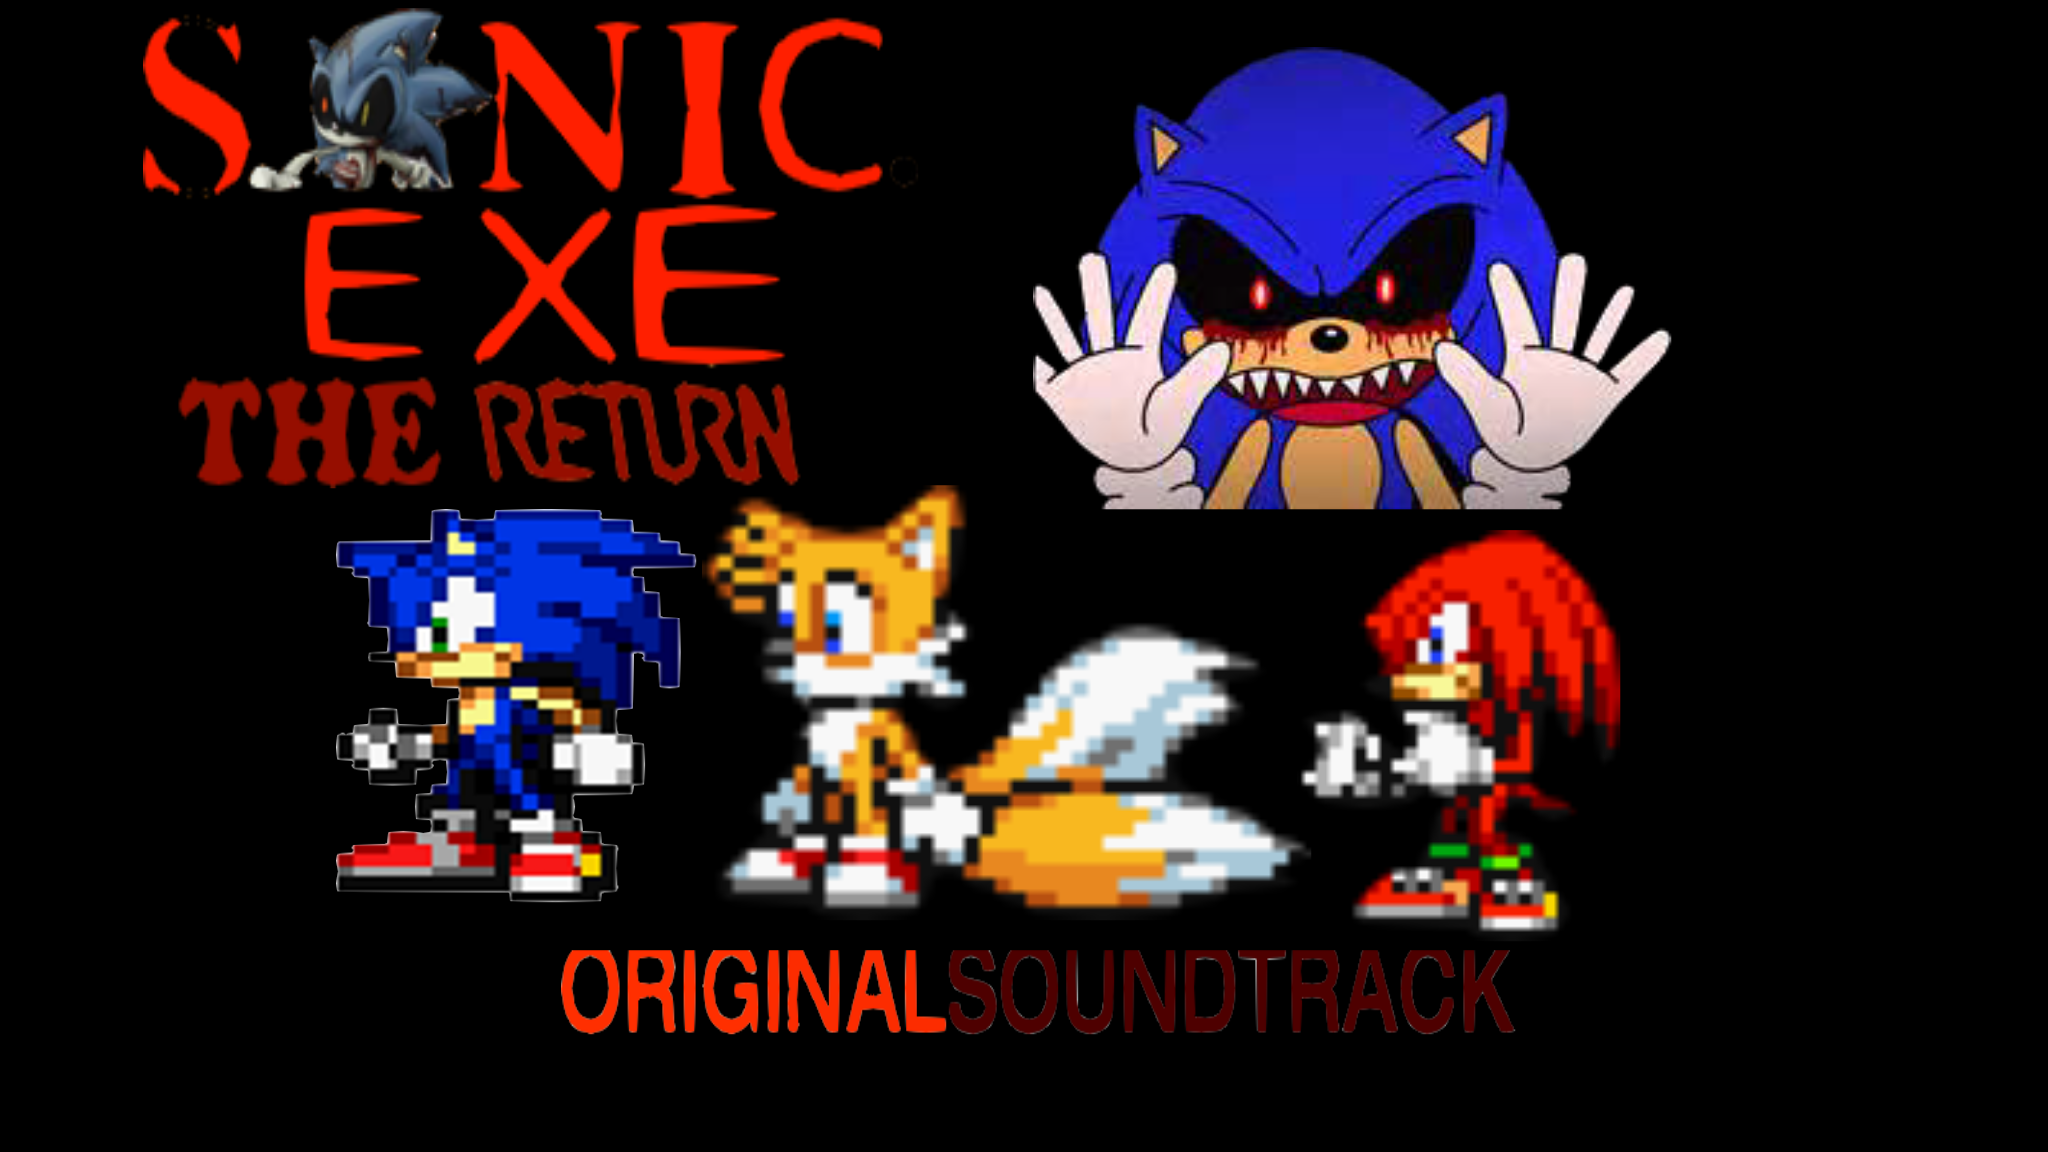 Sonic Exe The Return Rpg By Sonicfasterundertale123 - Cartoon , HD Wallpaper & Backgrounds